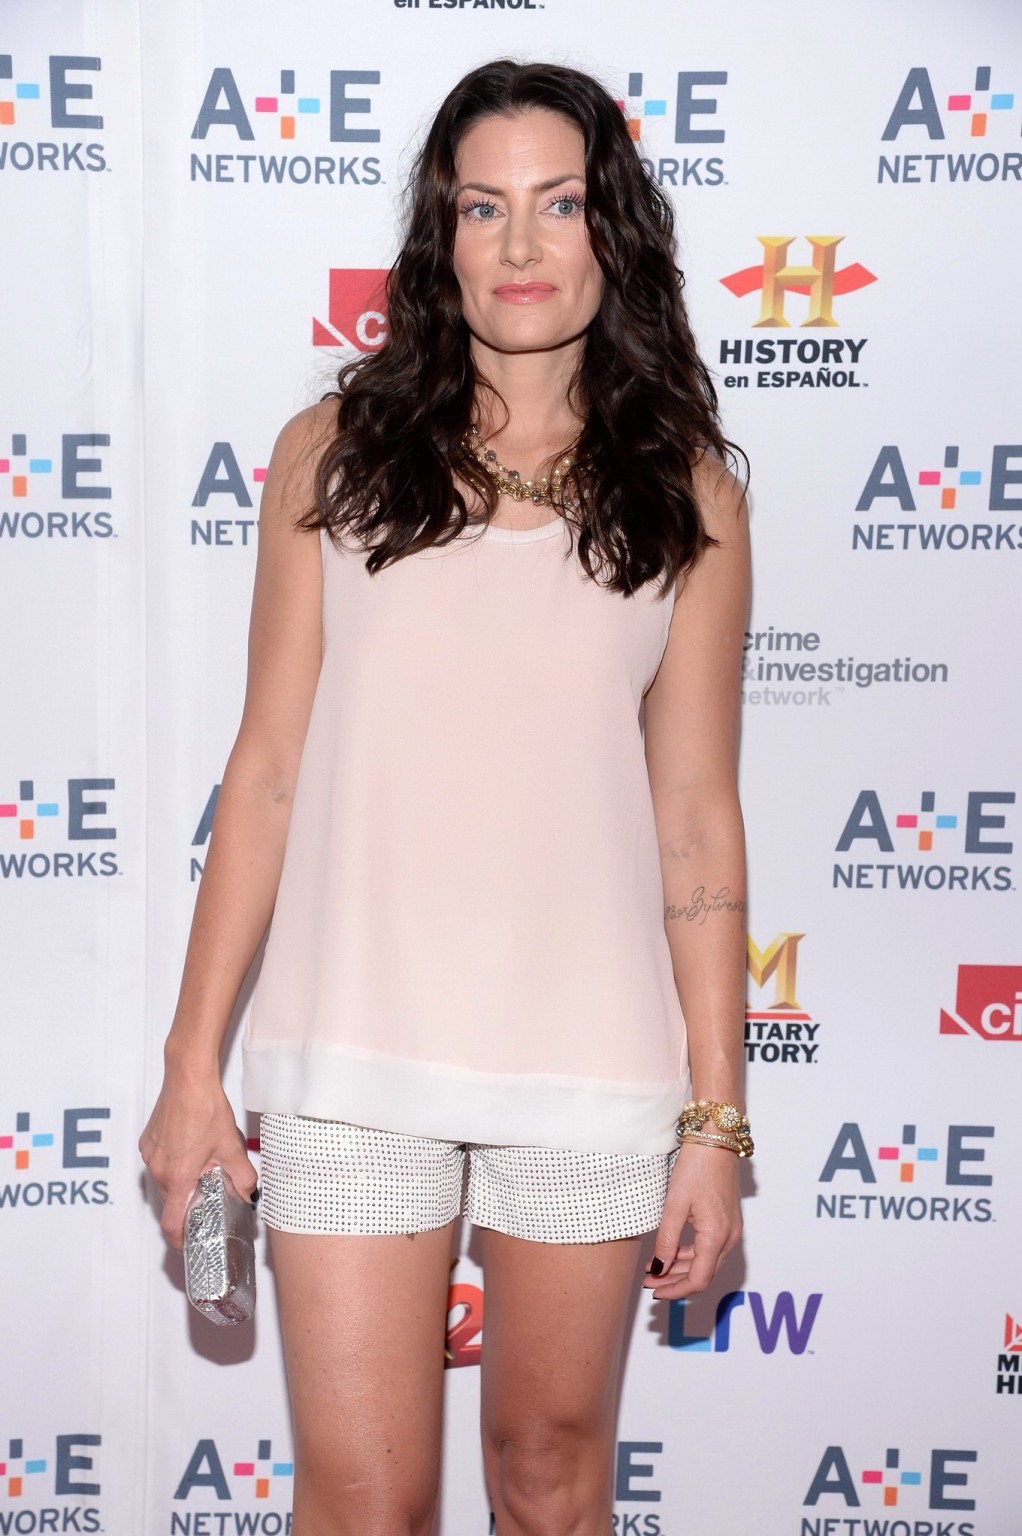 Madchen Amick leggy wearing shorts at the  A E Networks Upfront in NYC #75232695